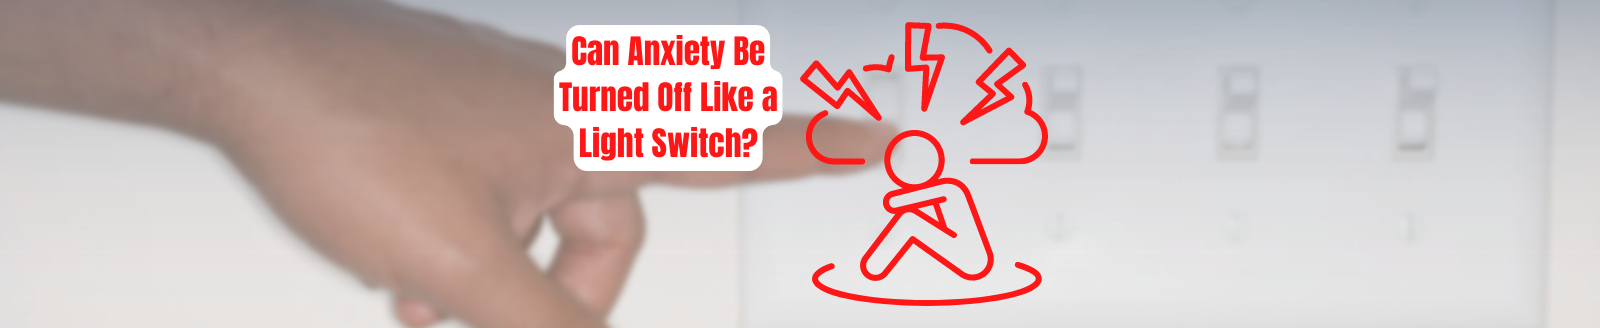 can anxiety be turned off like a light switch